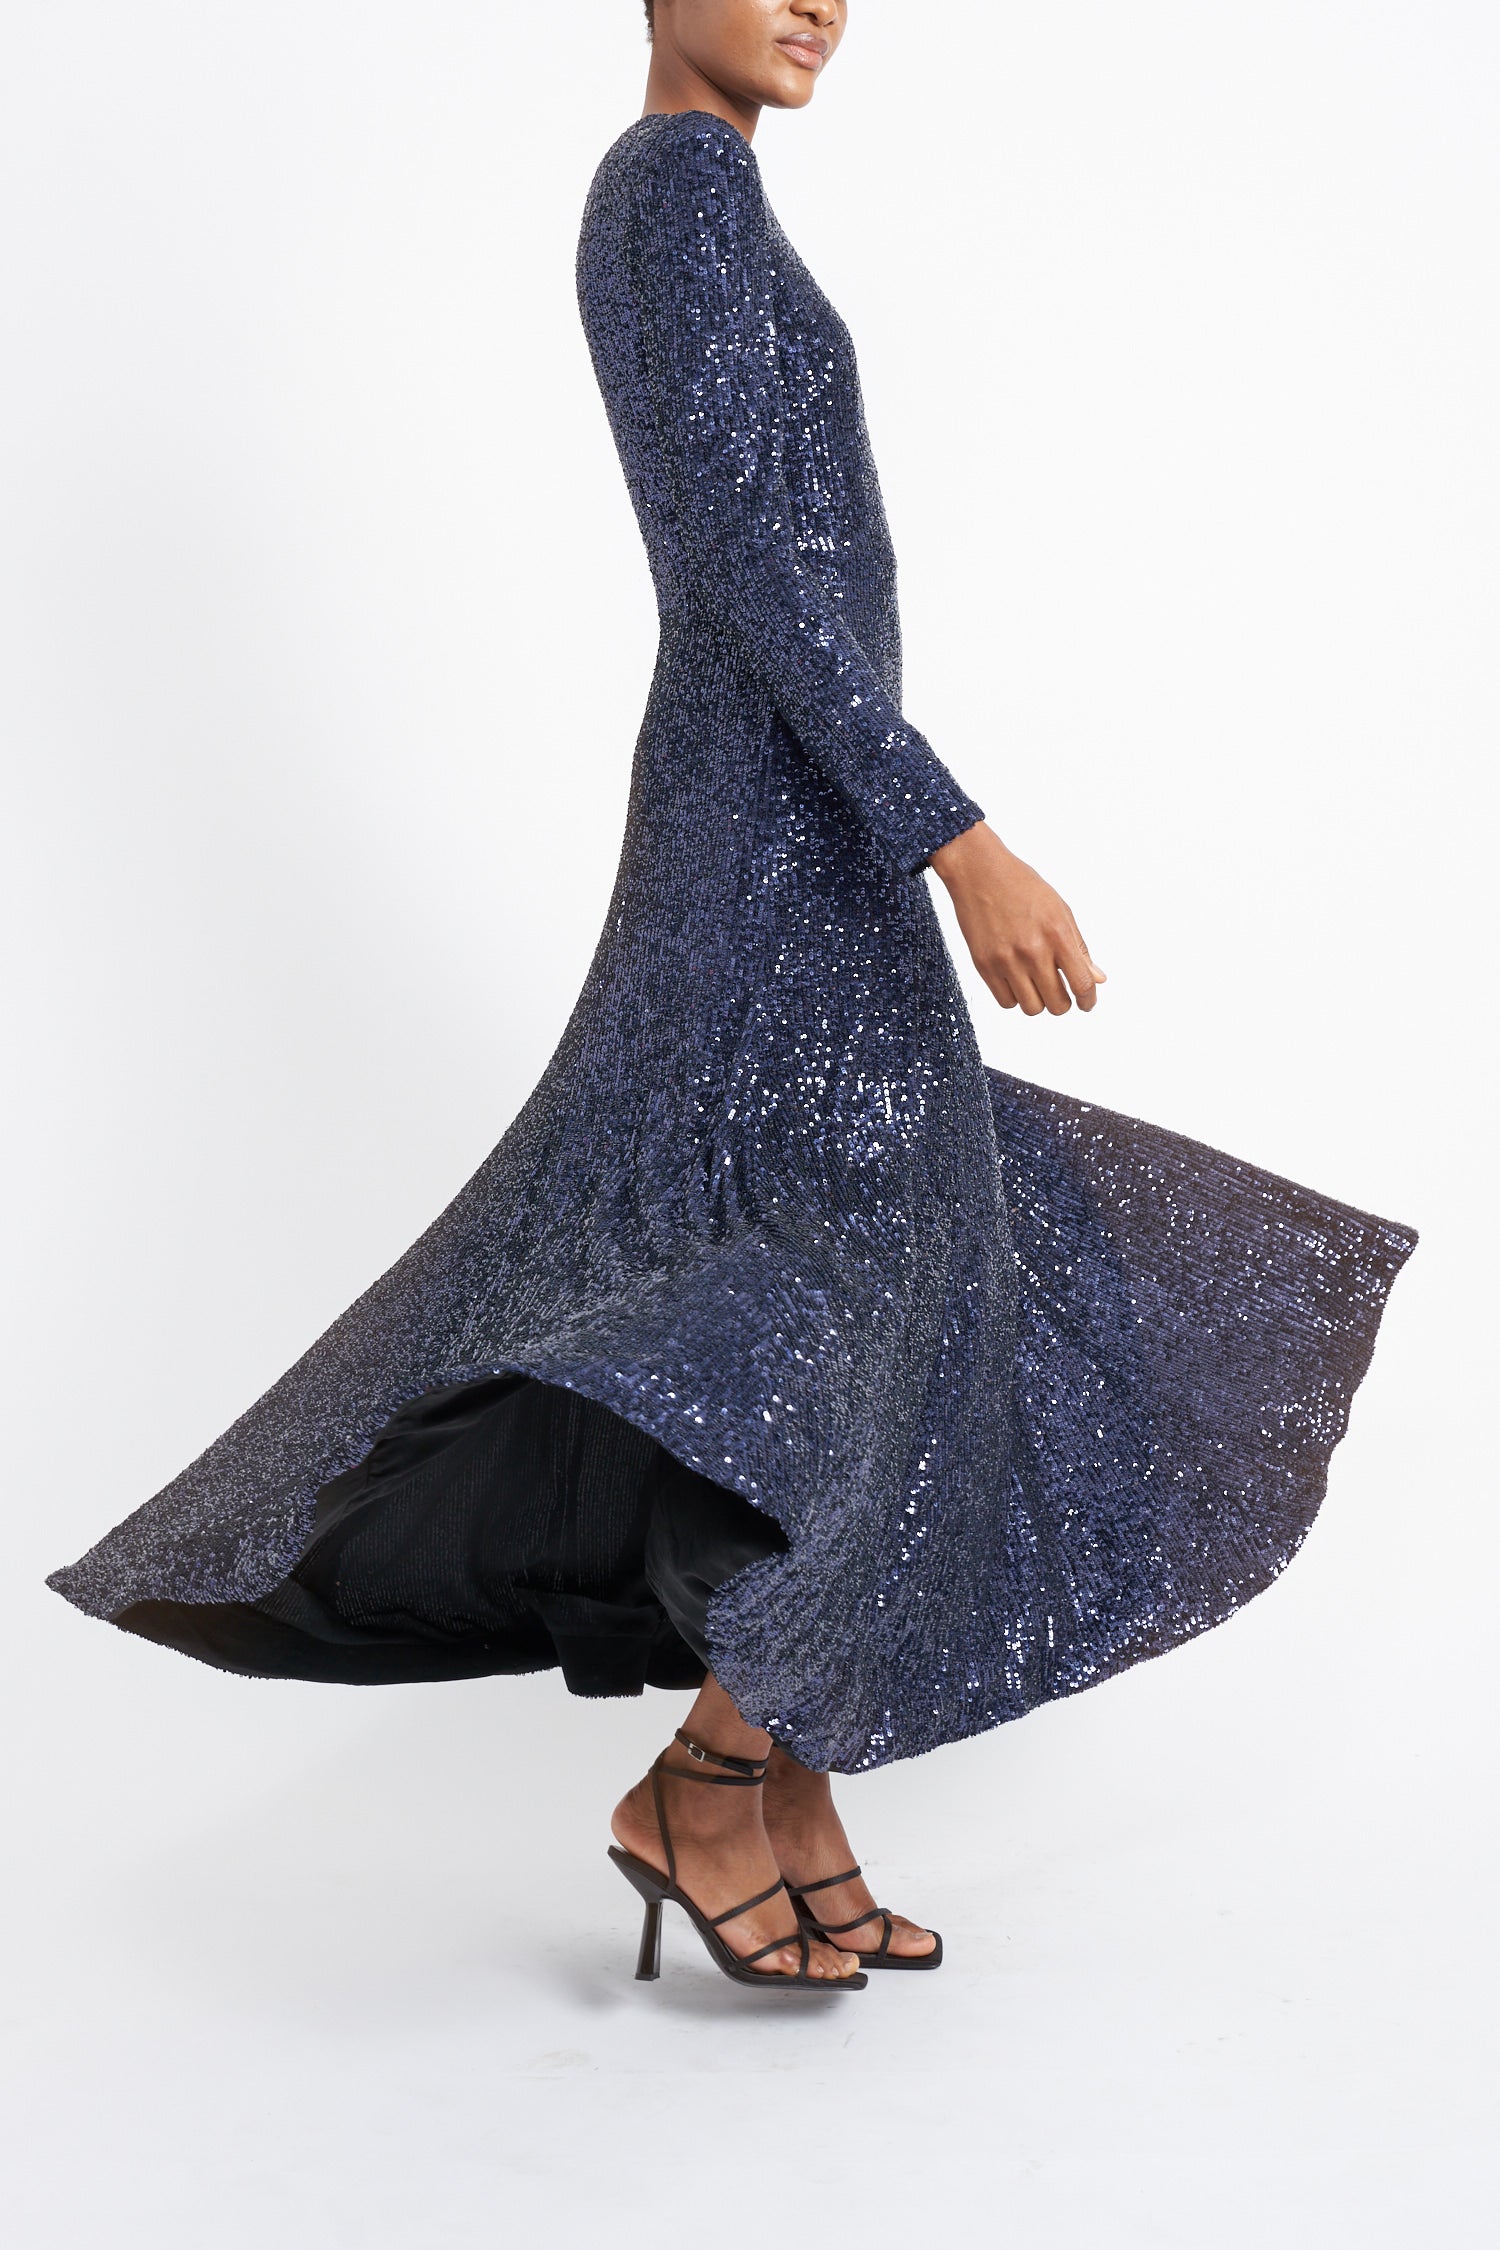 MAYA SUSTAINABLY SOURCED NAVY SEQUIN DRESS